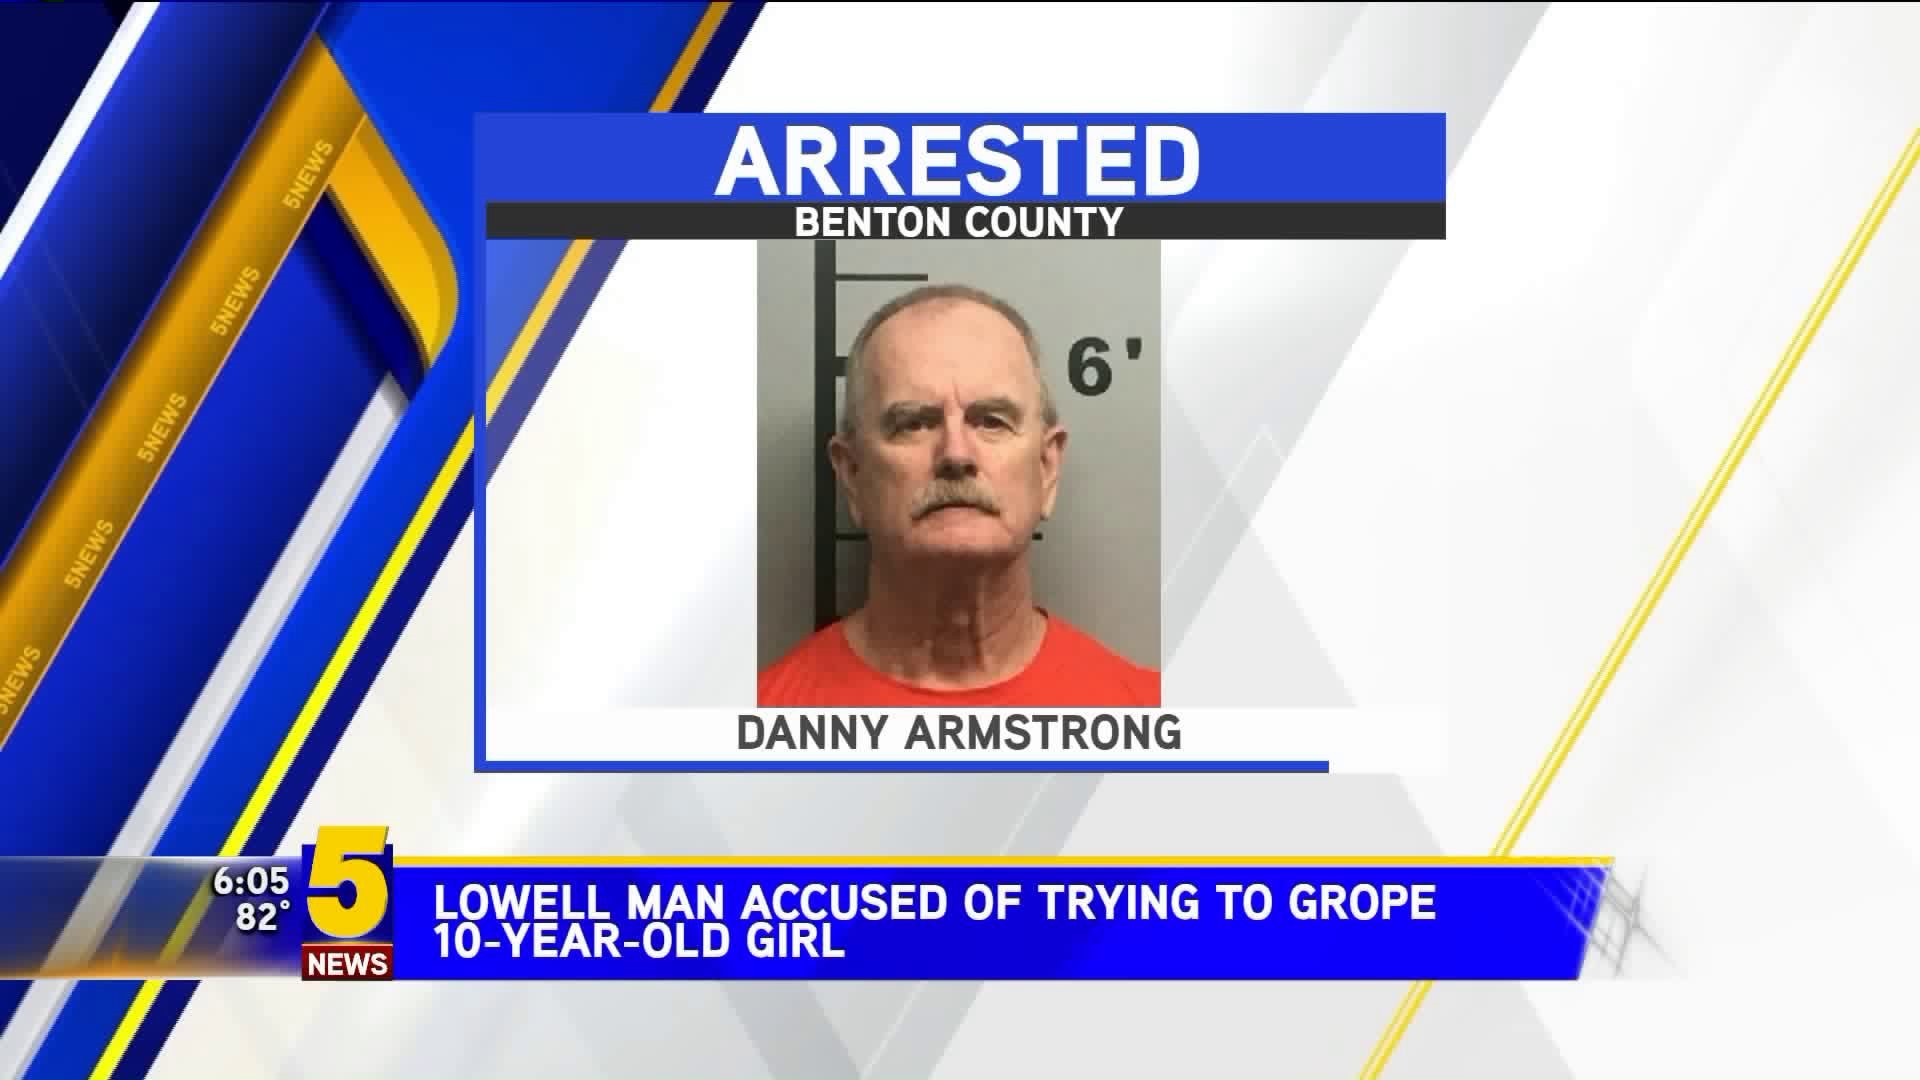 Lowell Man Accused of Trying to Grope 10-year-old